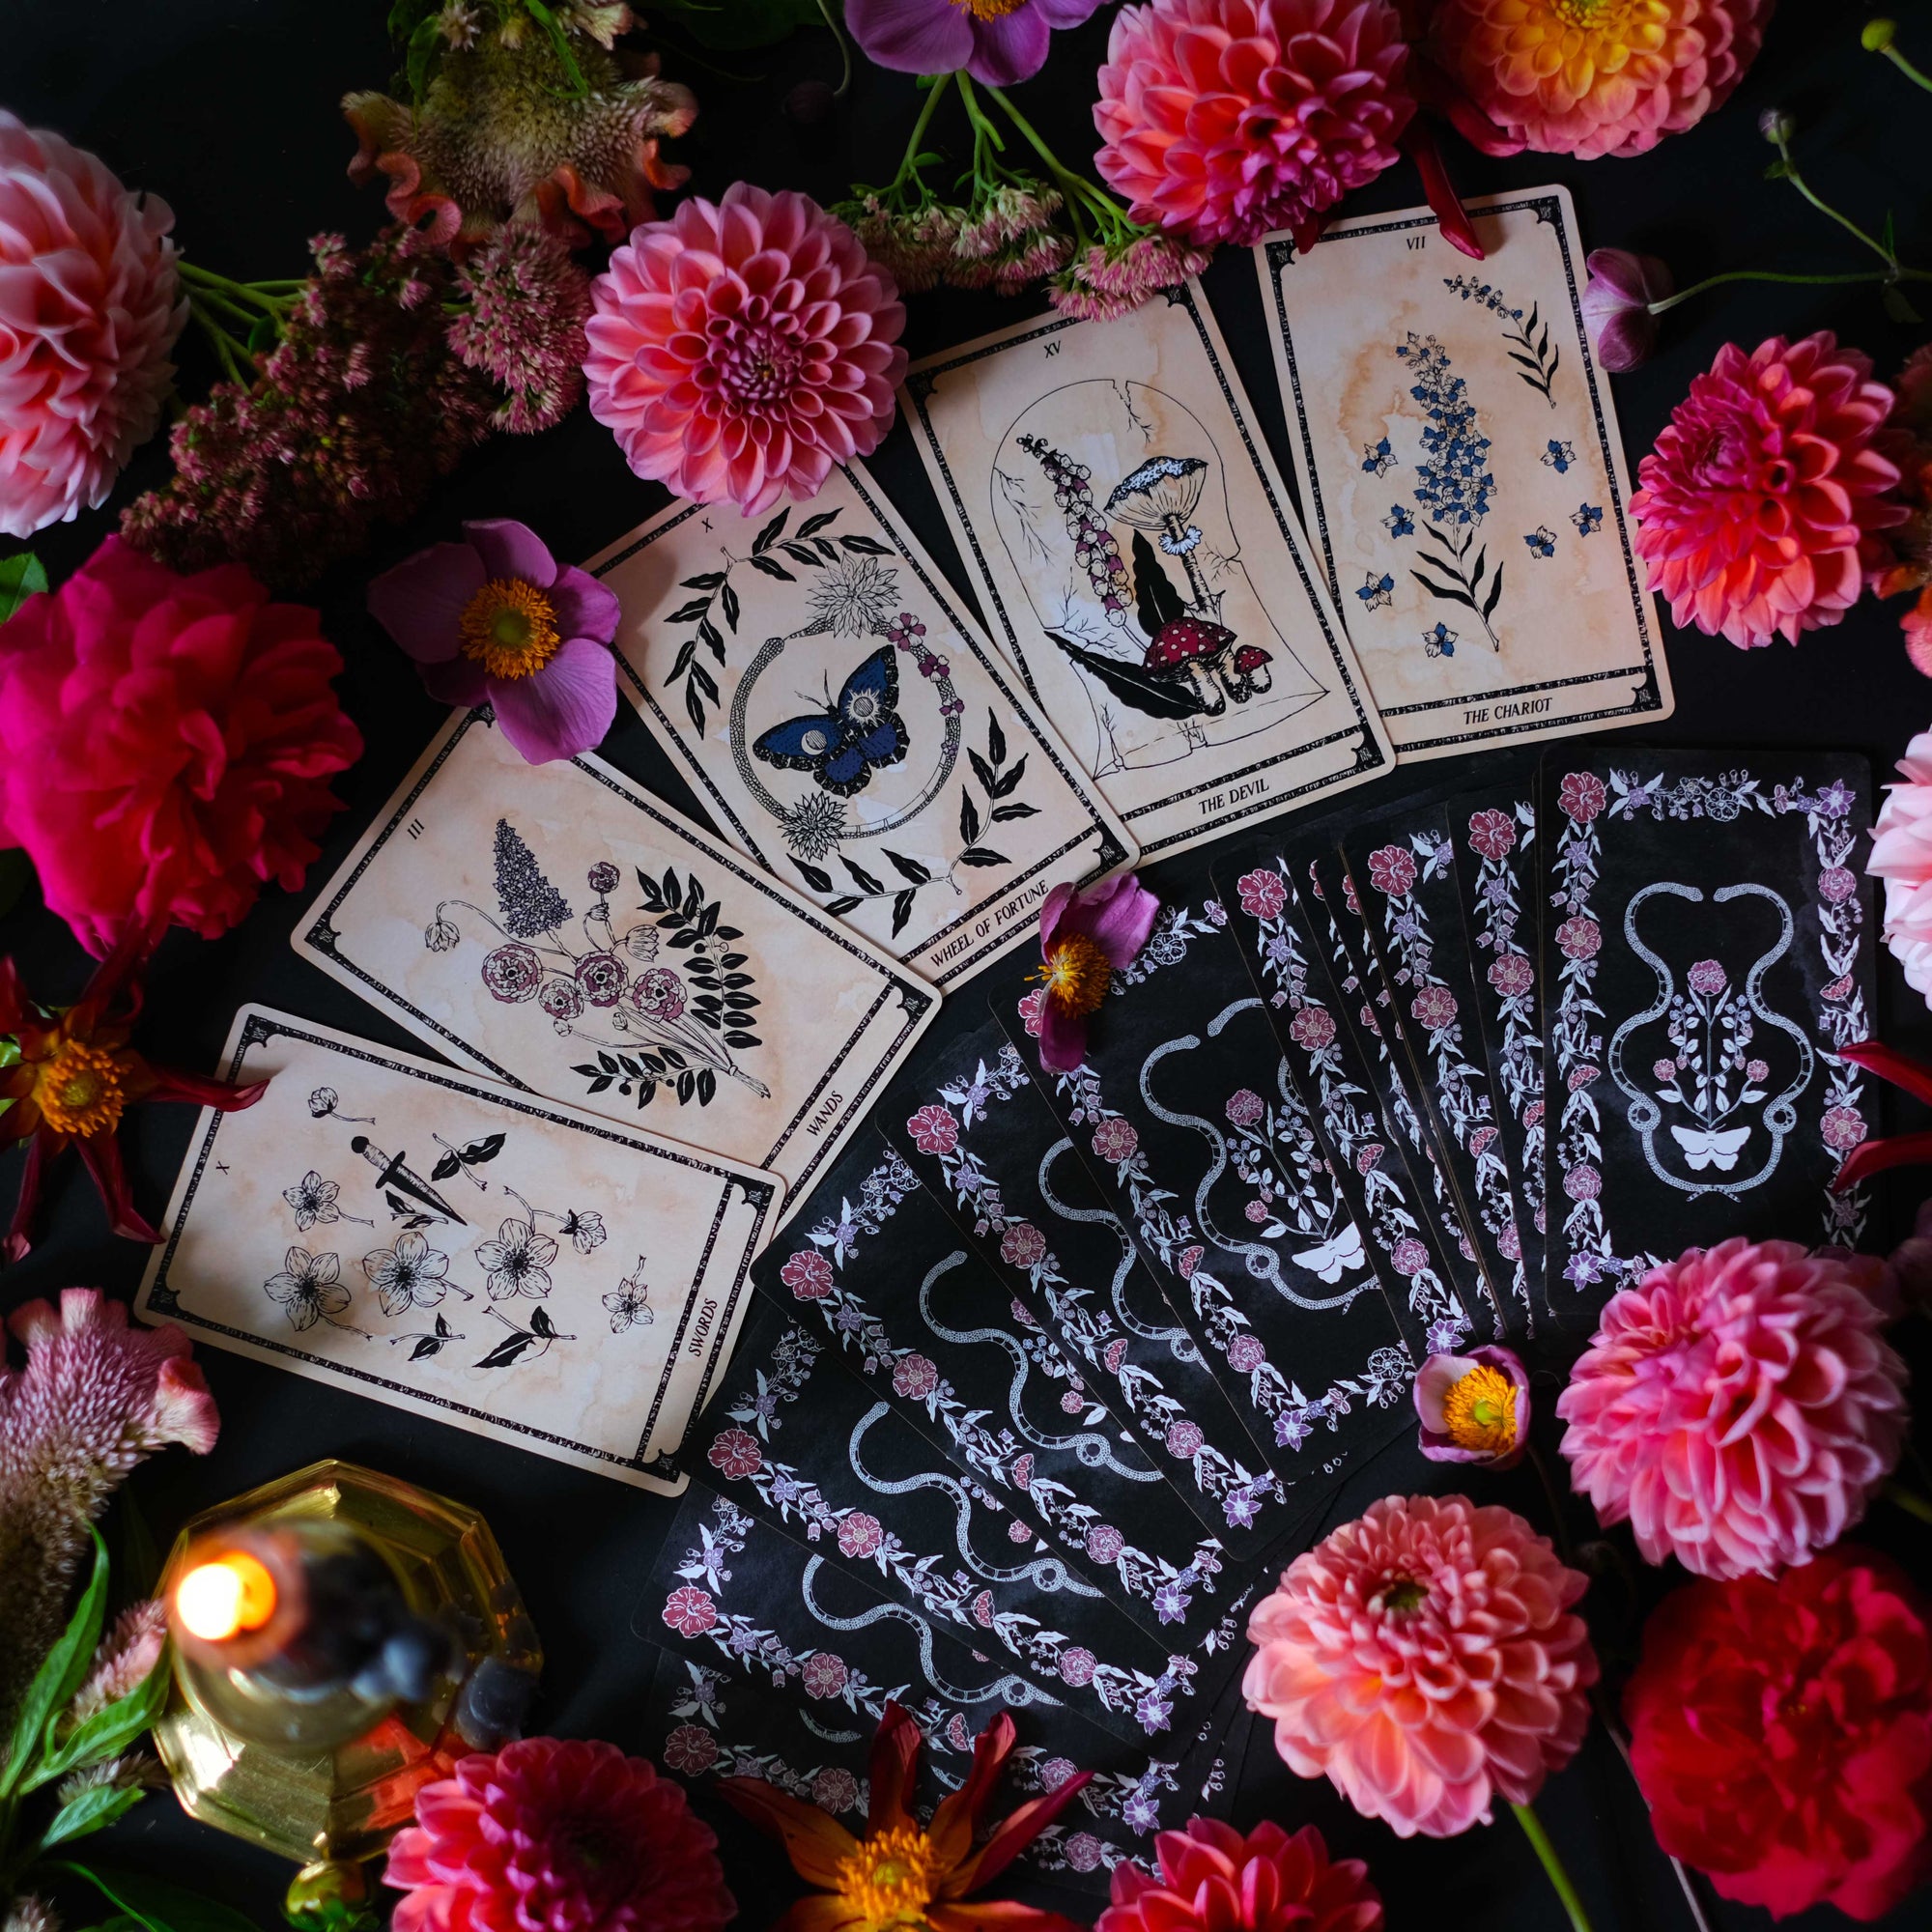 Botanical Tarot deck, Viola Lux Umbra, is illustrated by hand. Each of these botanical and plant inspired, intuitive tarot deck cards delves into the garden and the natural world while remaining rooted in mythology and tradition.